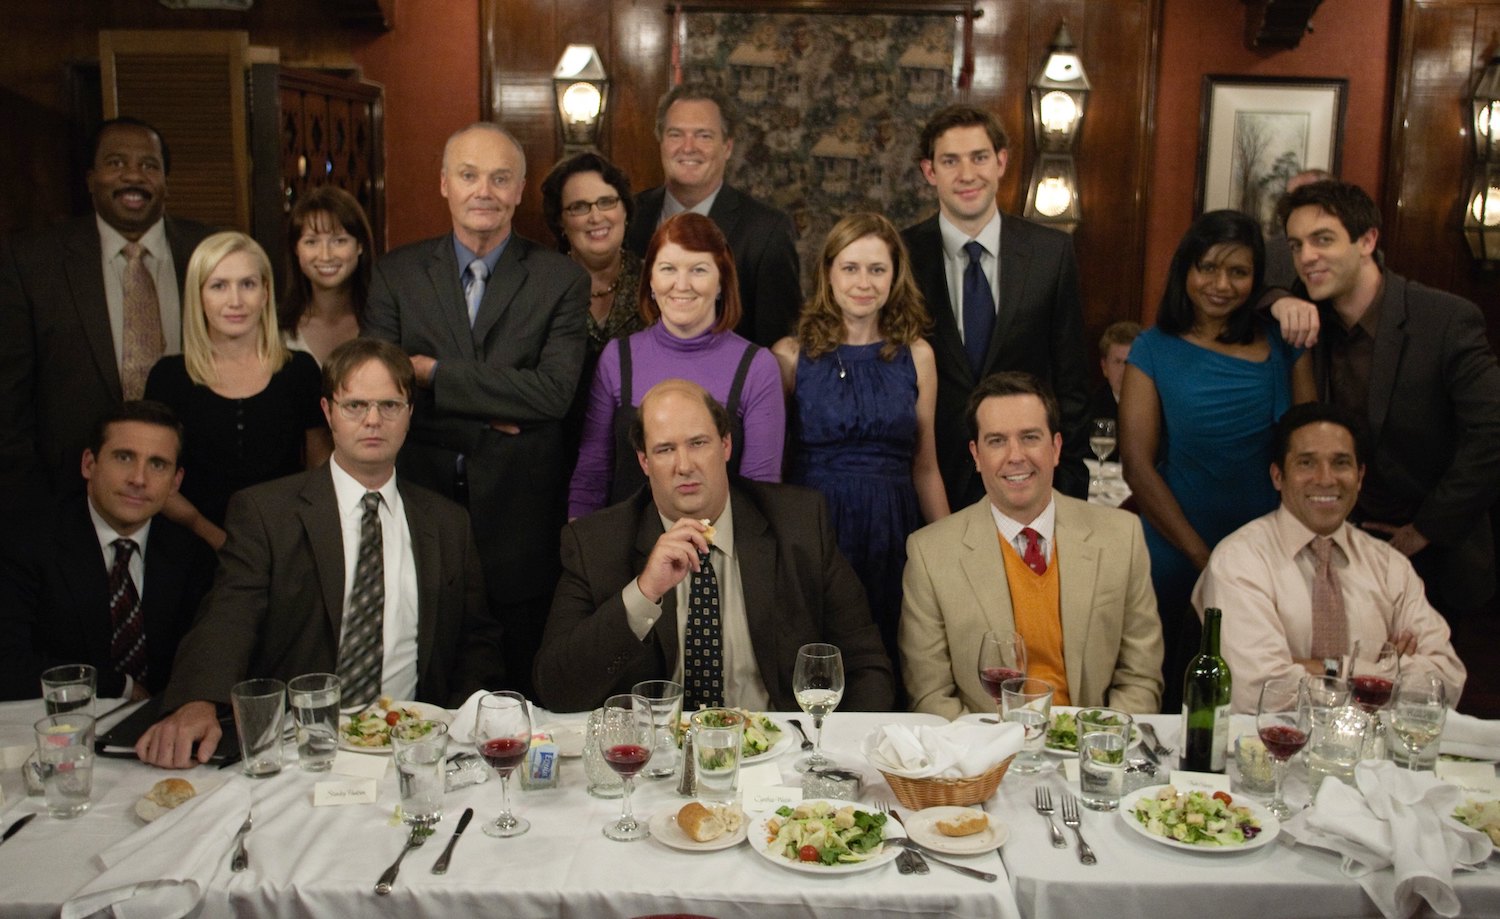 The cast of 'The Office'